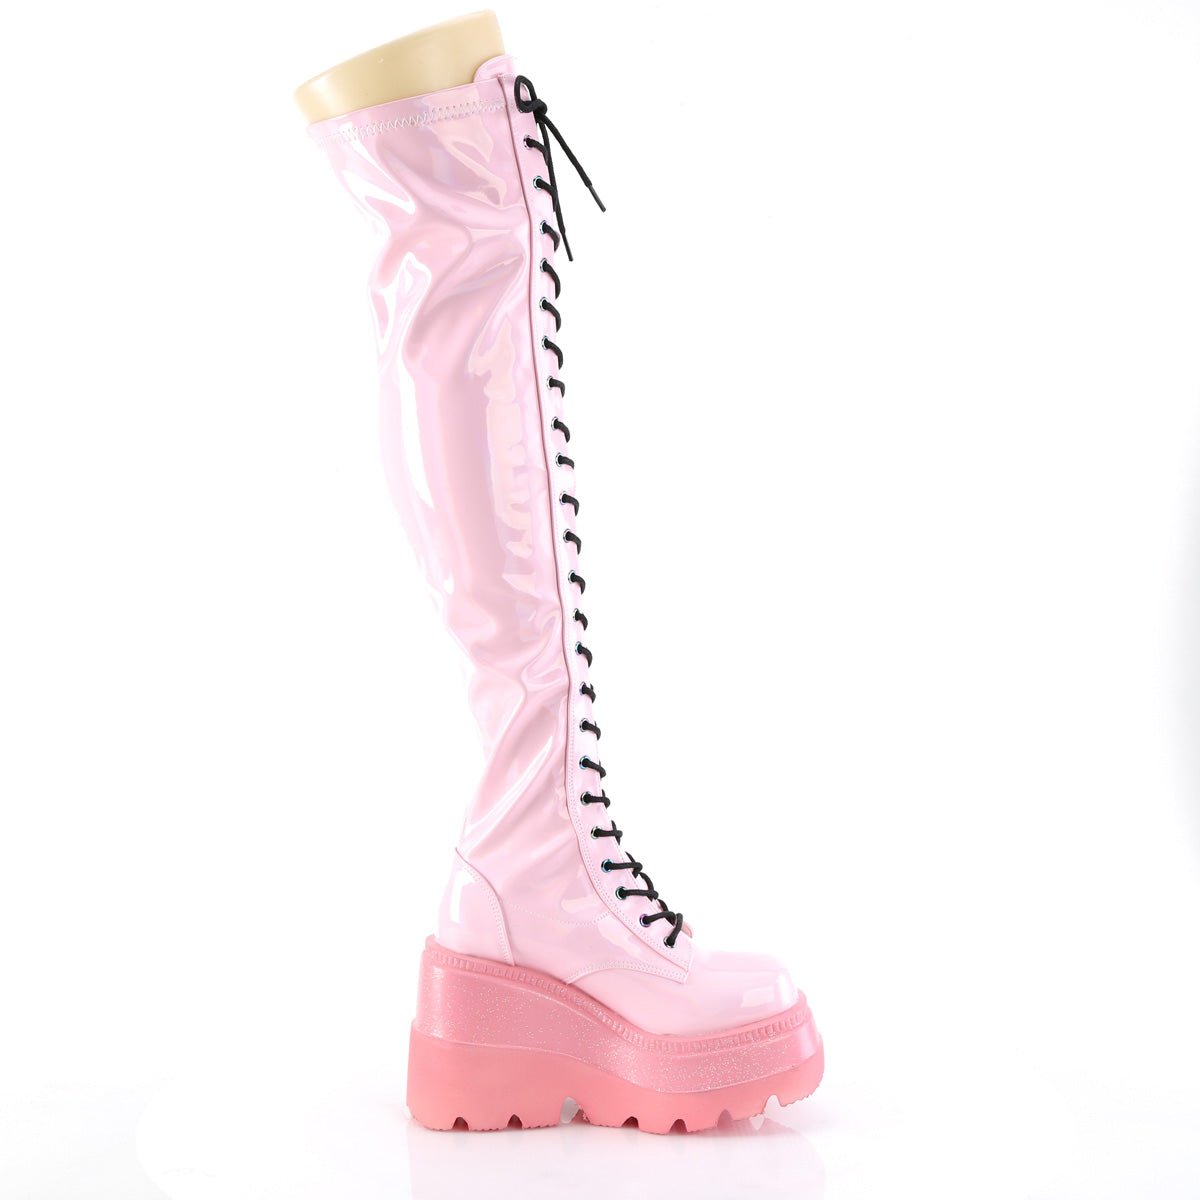 Too Fast | Demonia Shaker 374 1 | Baby Pink Hologram Stretch Patent Leather Women&#39;s Over The Knee Boots